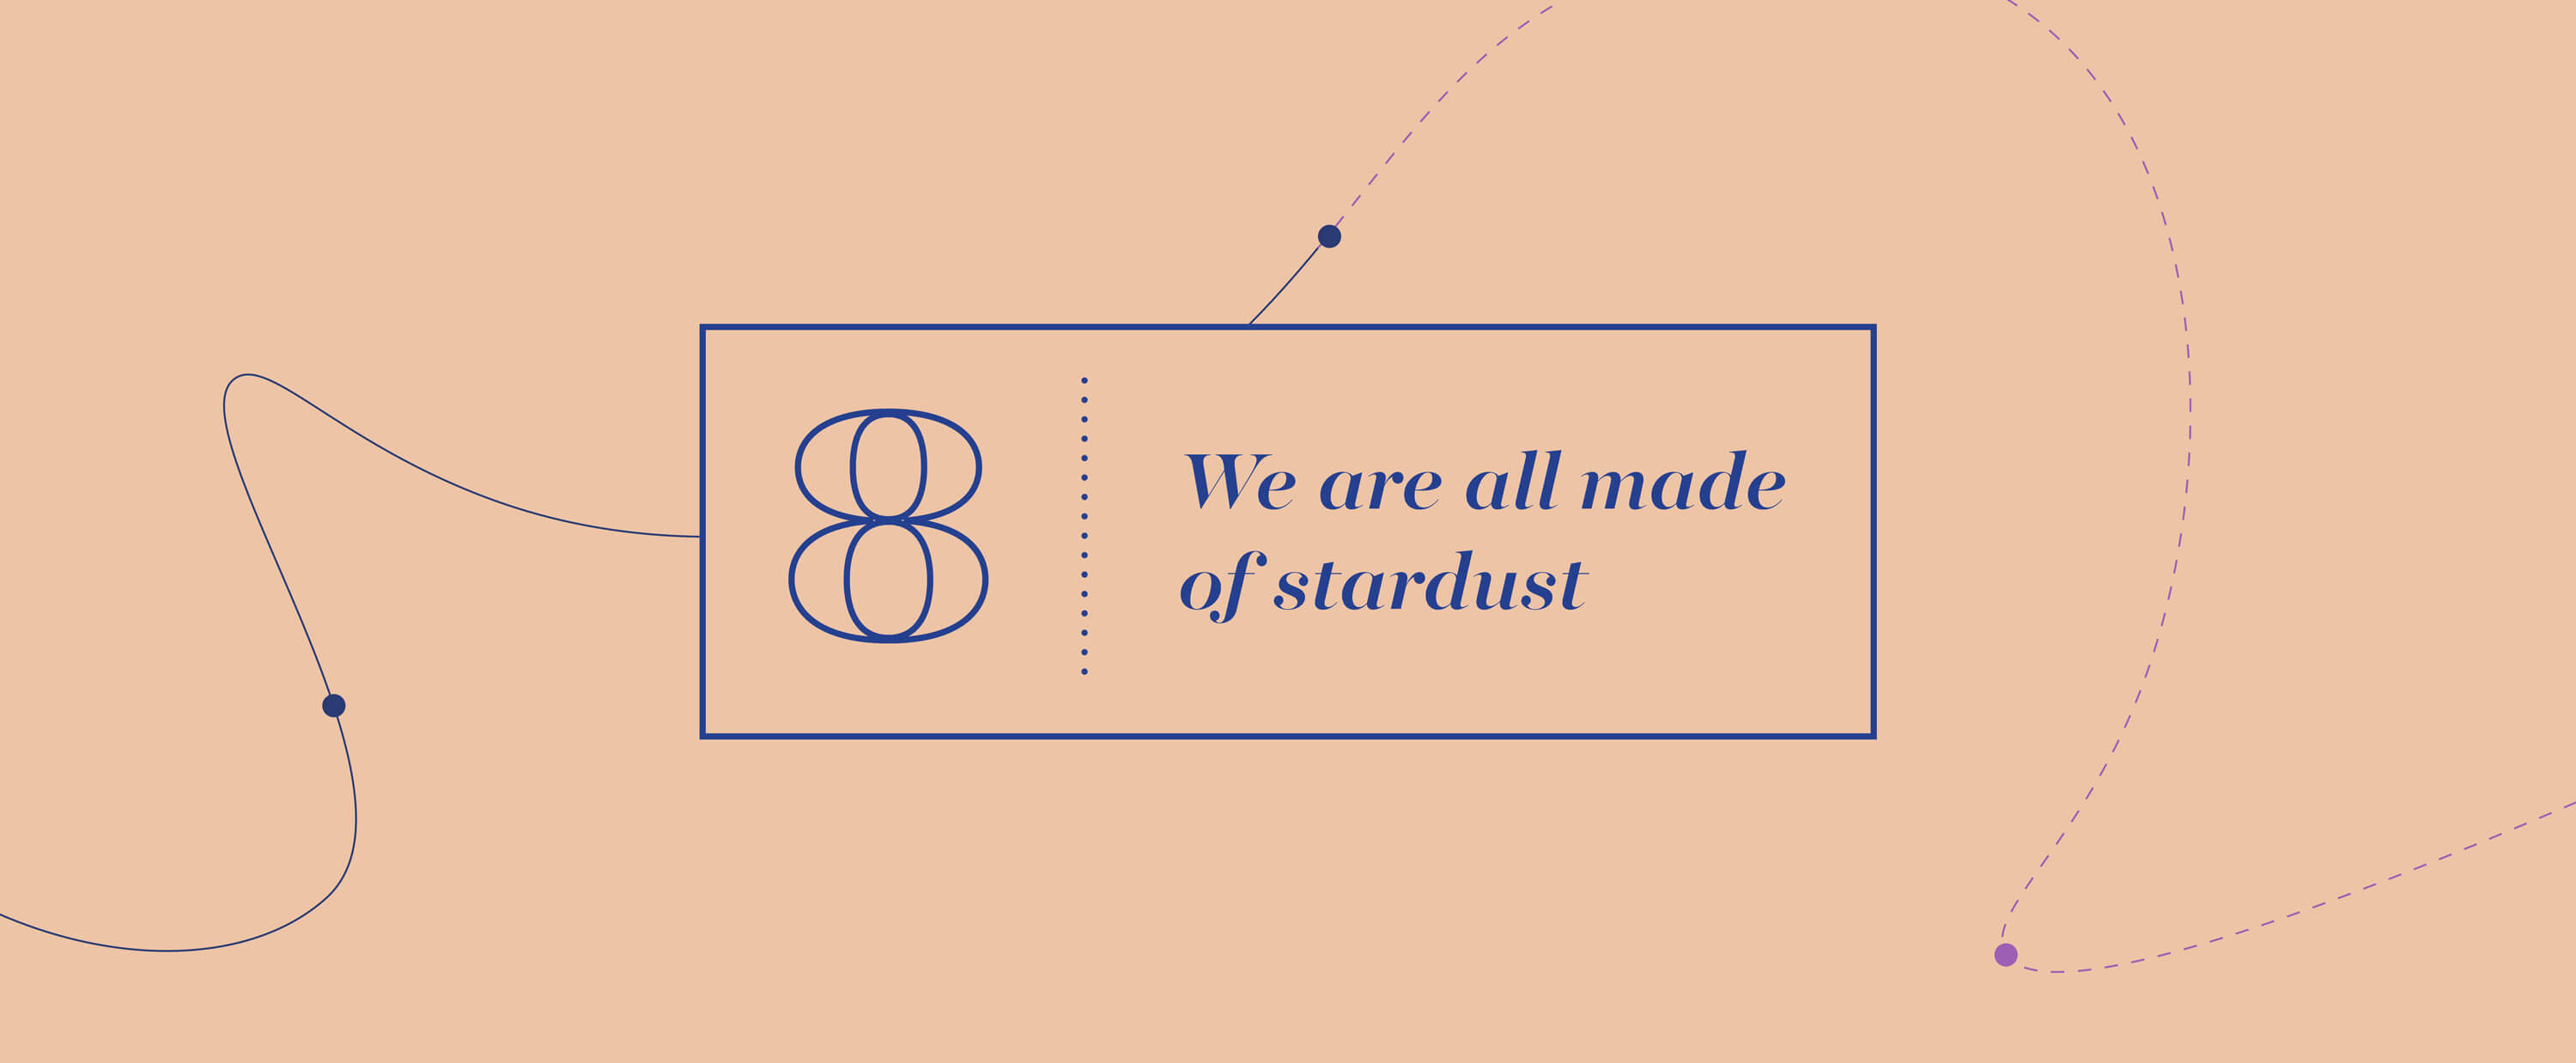 Big Idea 8 - We are all made of stardust